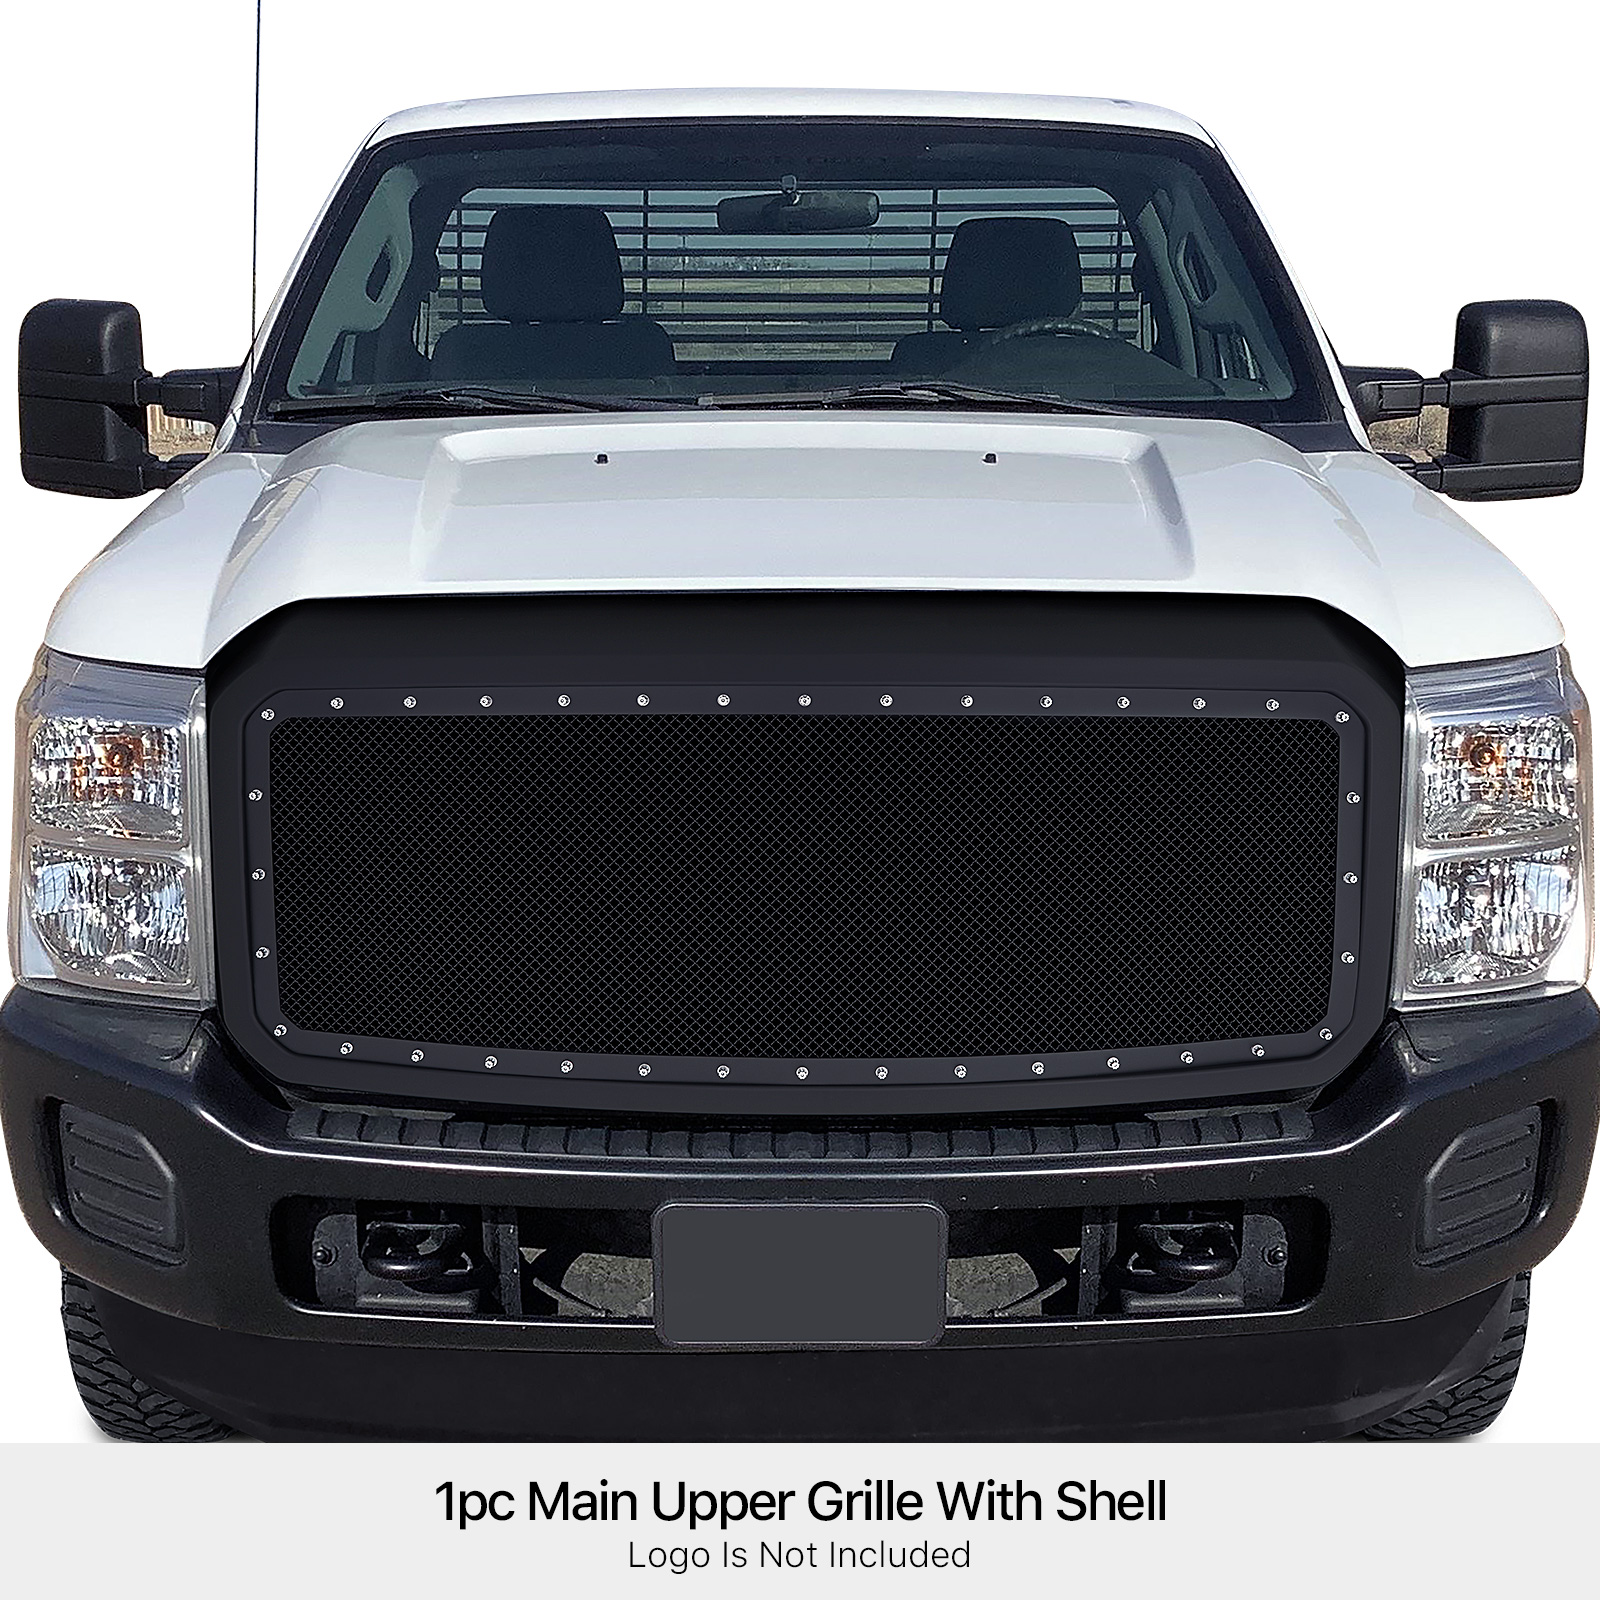 2011-2016 Ford F-250 SD /2011-2016 Ford F-350 SD /2011-2016 Ford F-450 SD /2011-2016 Ford F-550 SD MAIN UPPER Package Grille